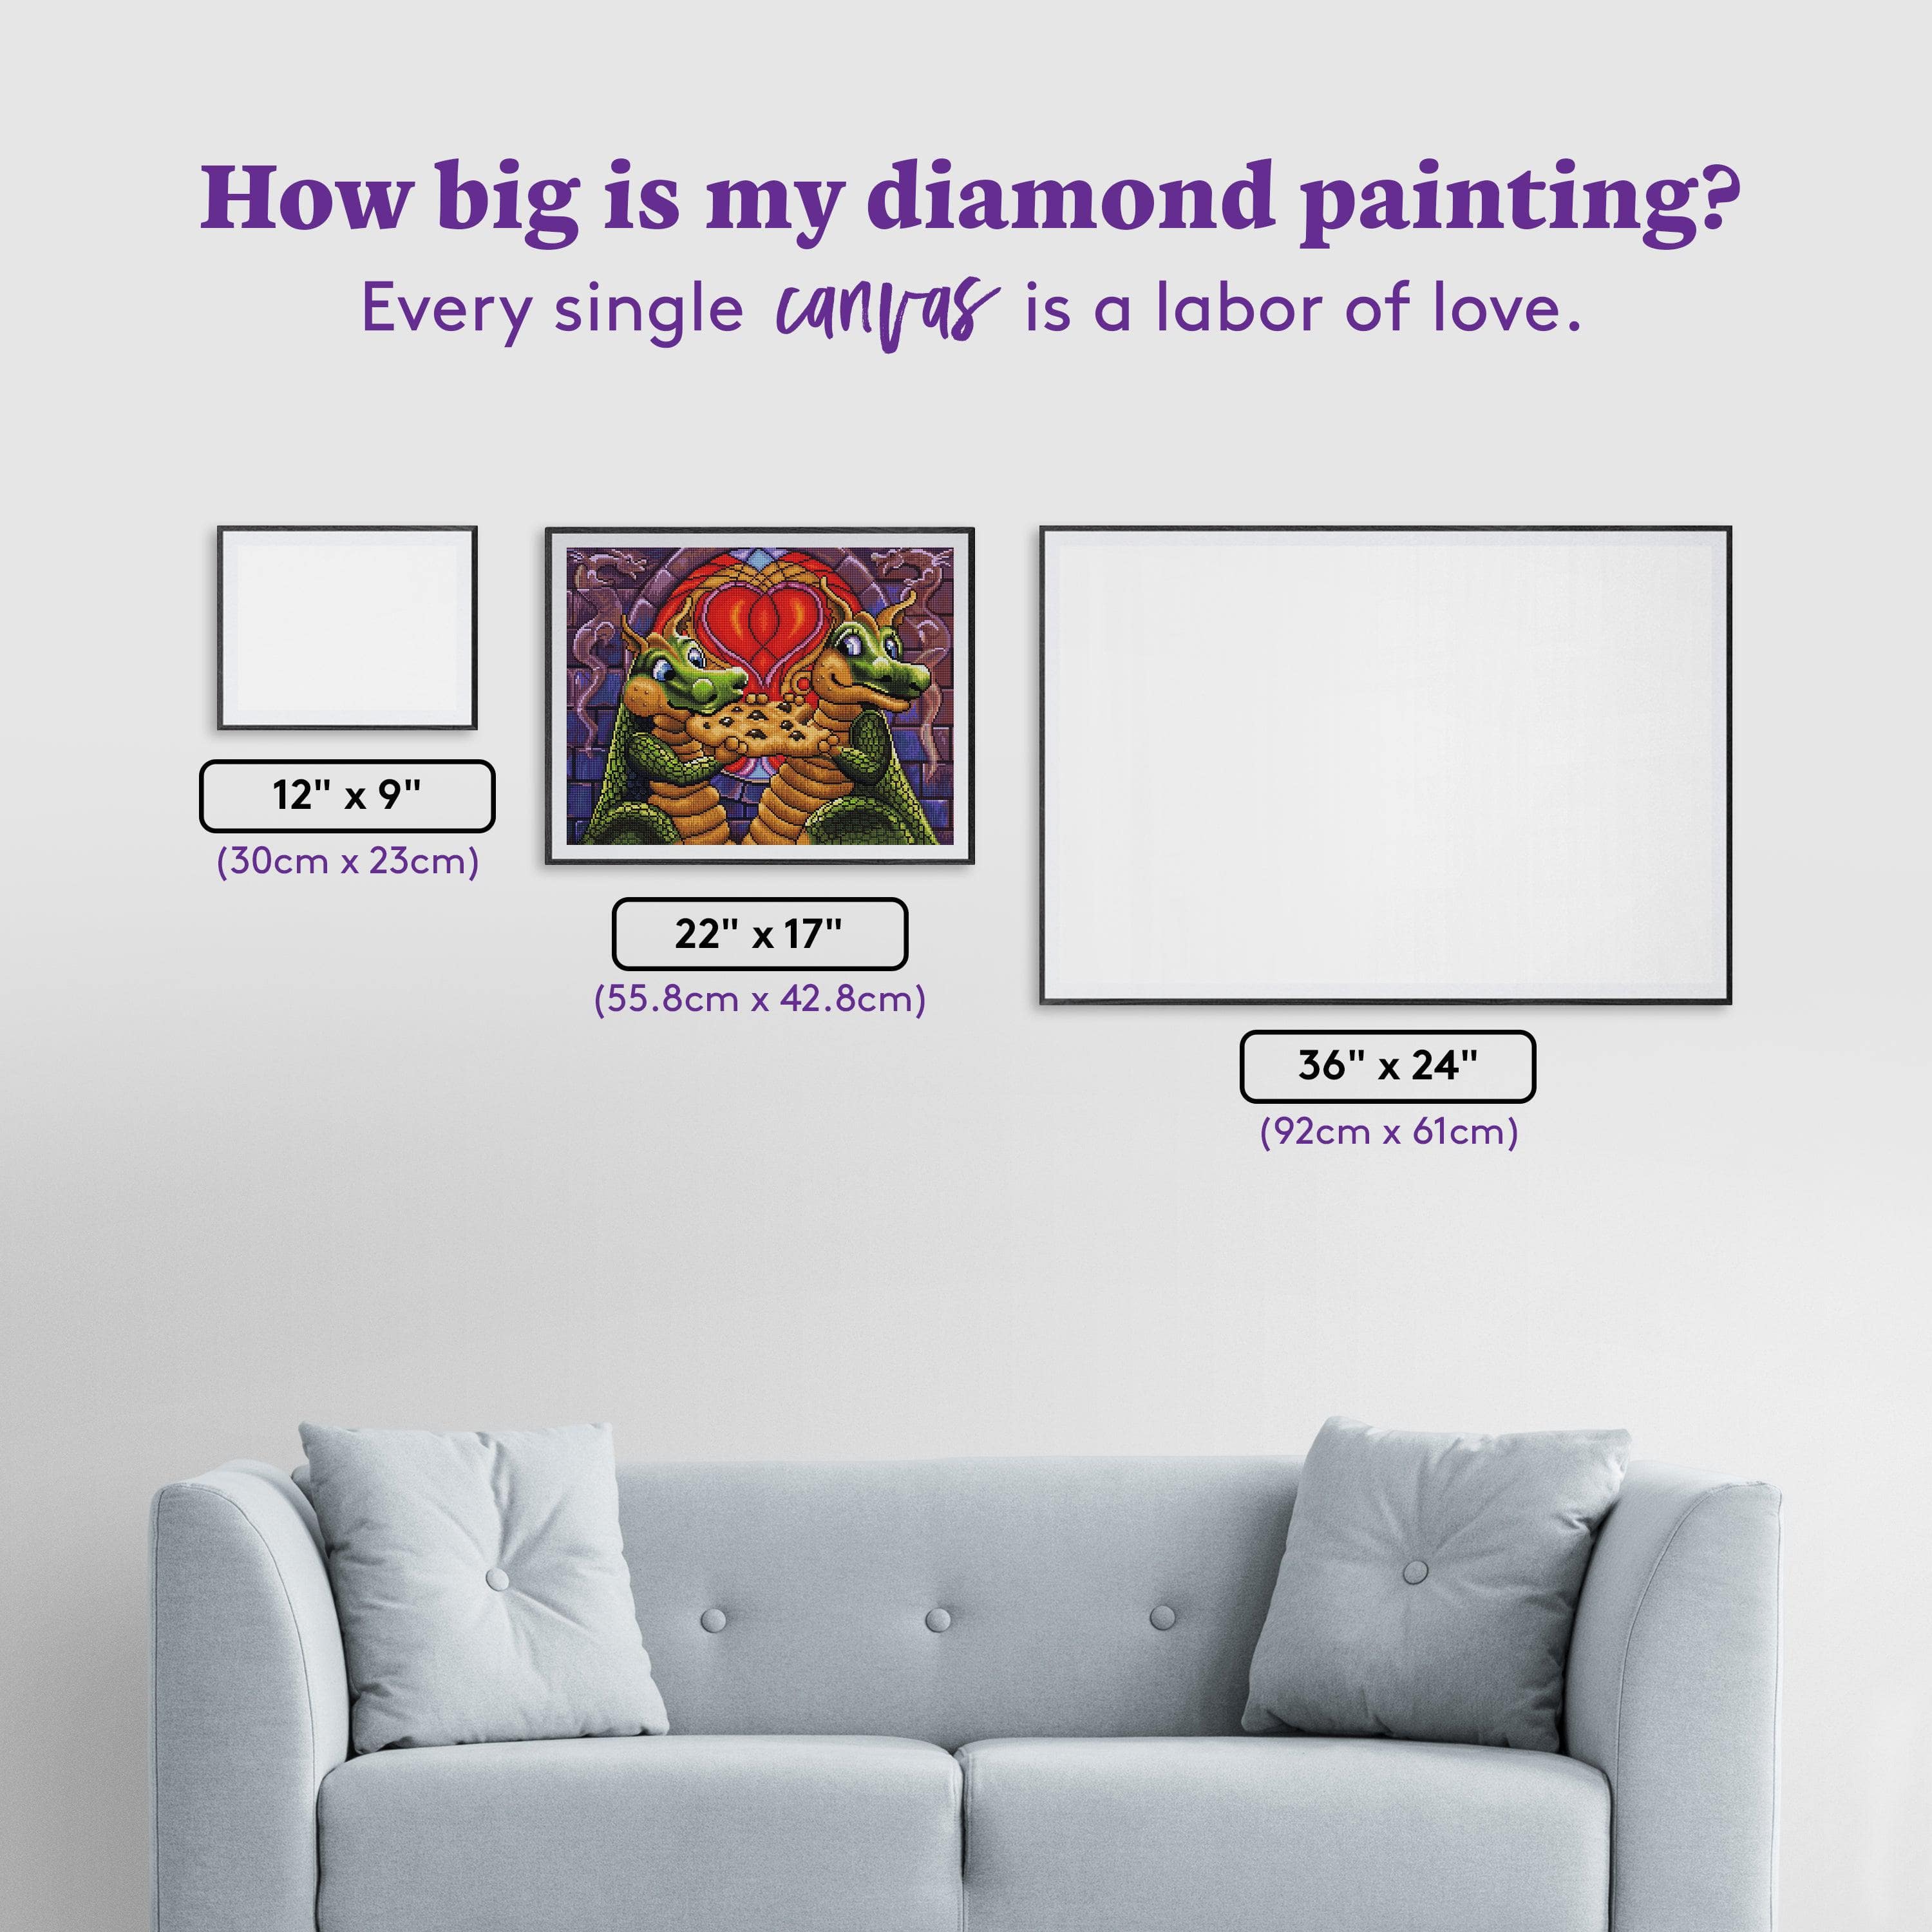 Not sure if my fellow diamond art enthusiasts knew about the